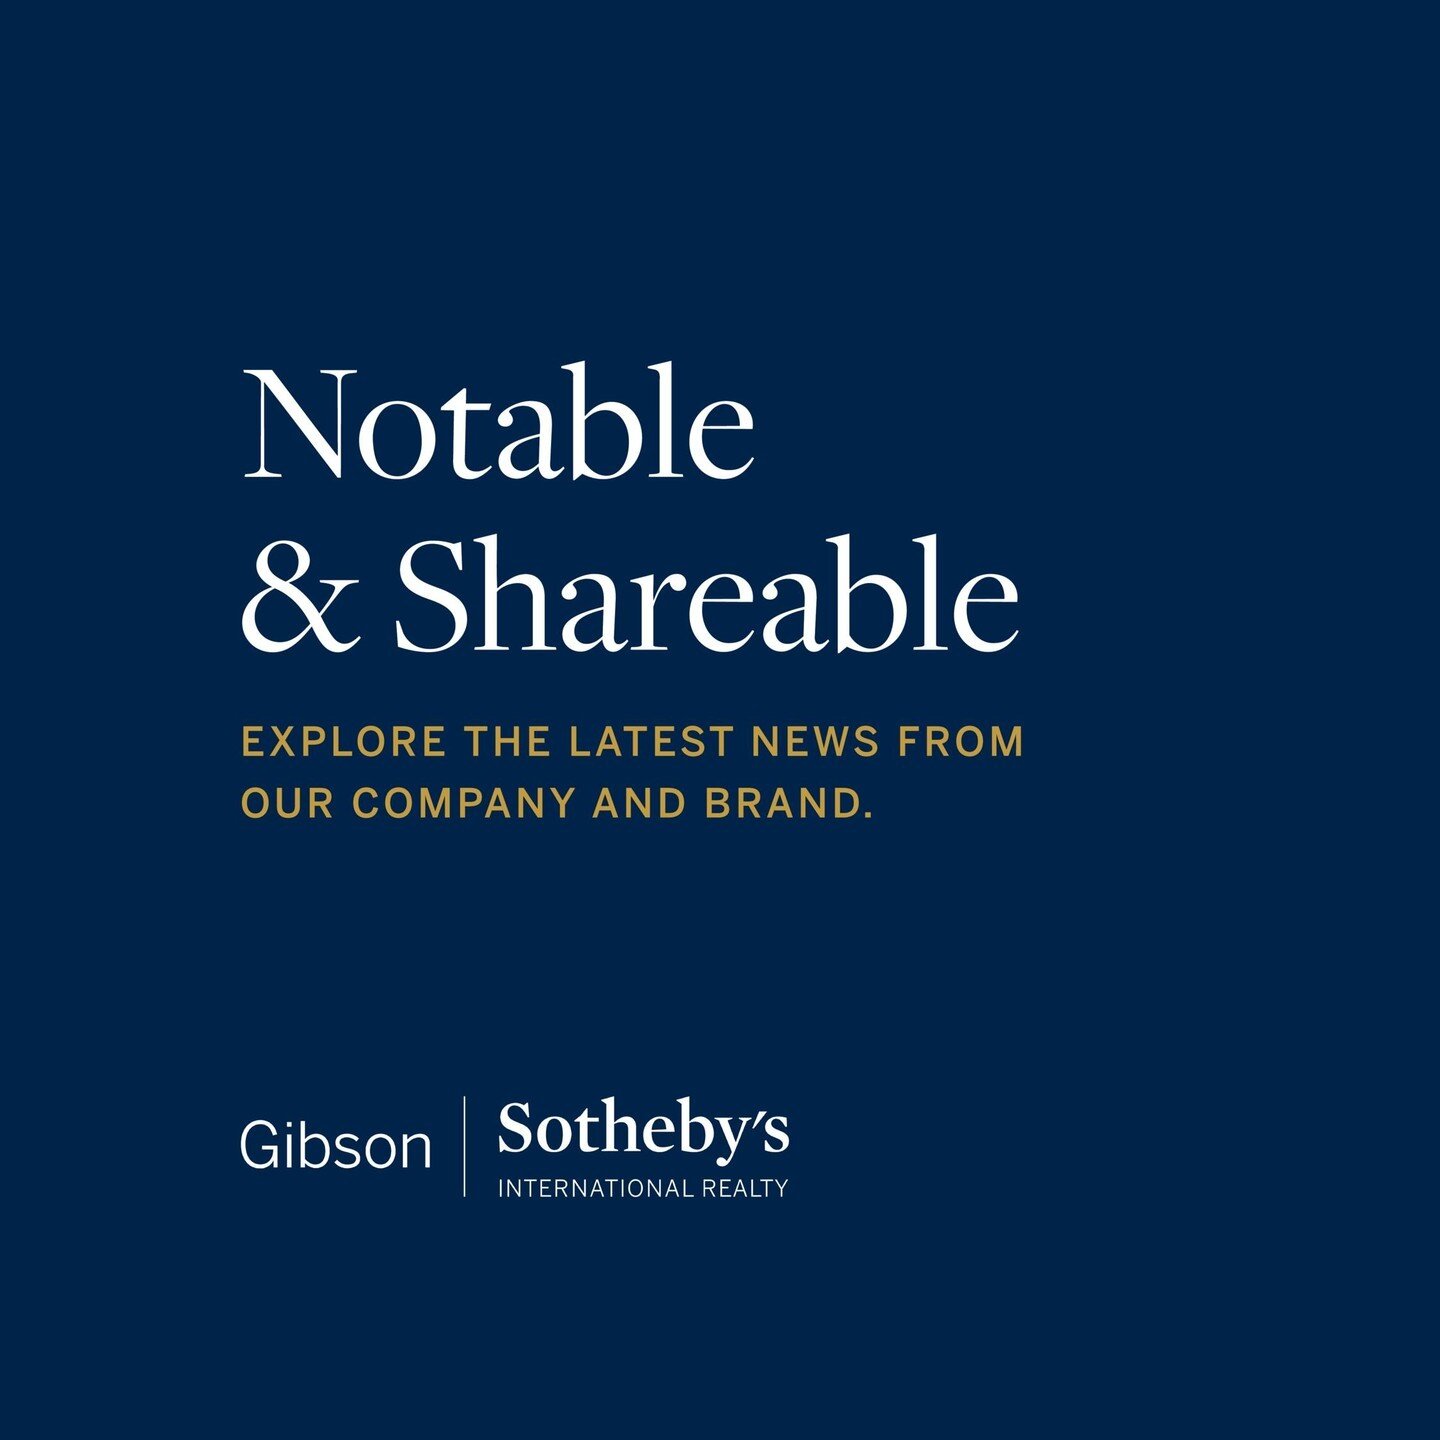 Working with a Gibson Sotheby's International Realty agent gives you access to the finest marketing and press. Swipe to see how we've made headlines this month, and connect with me to discover how we can get your property the attention it deserves.